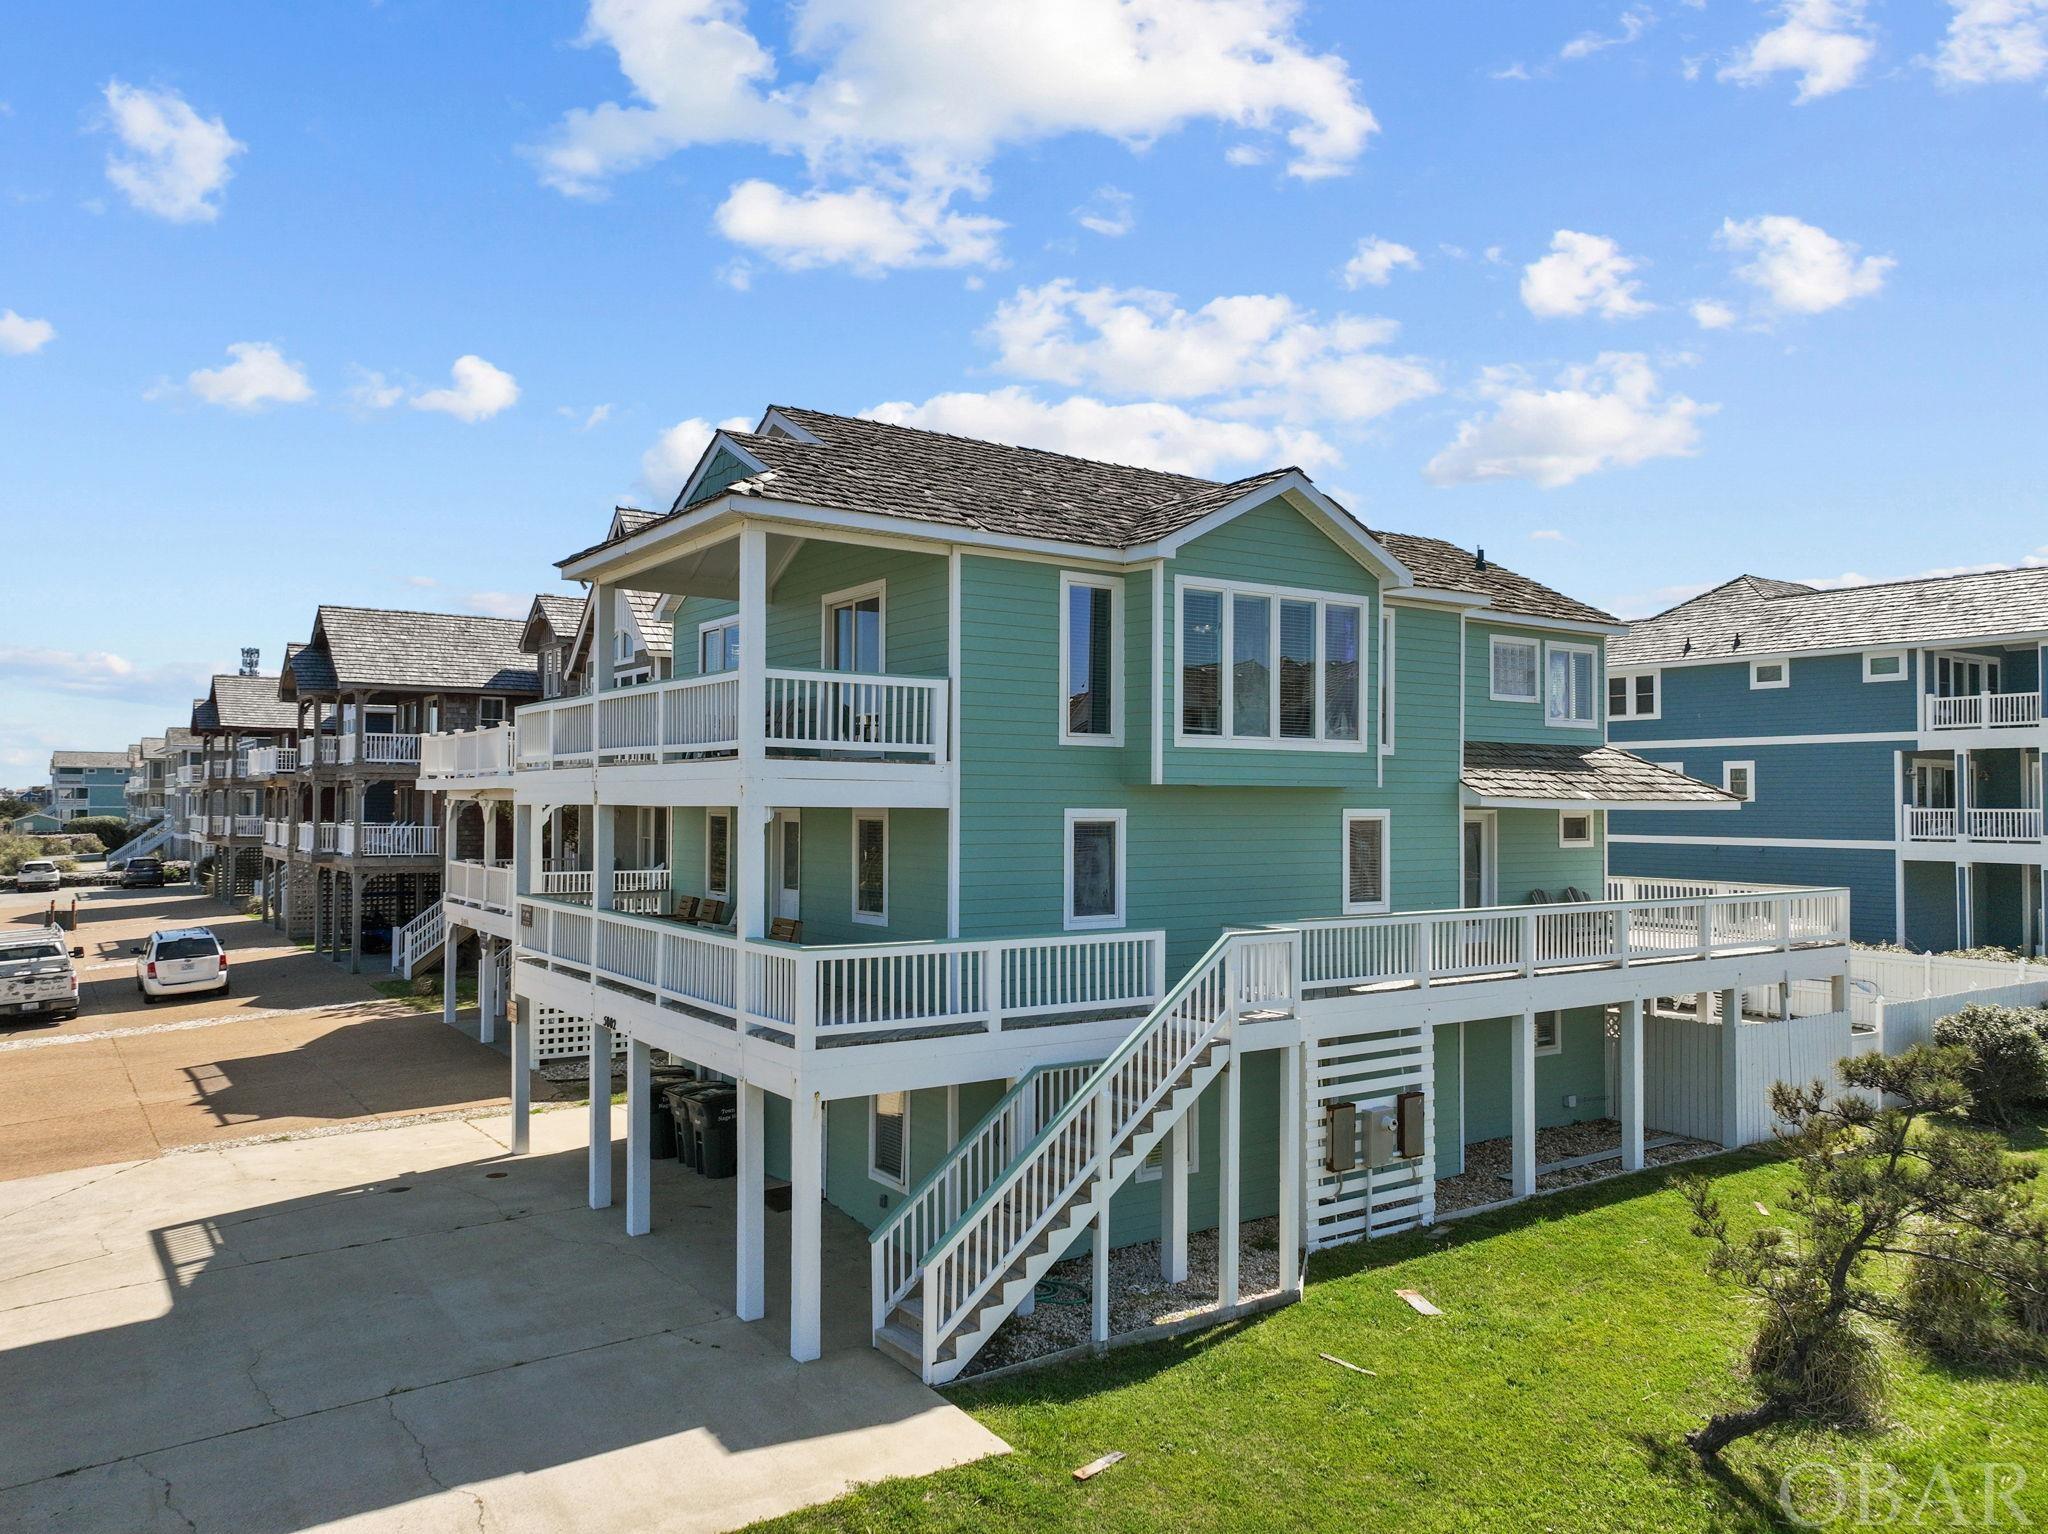 Welcome to your coastal paradise! Nestled on a corner lot where E. Mall Dr. meets the Beach Road in the charming Village of Nags Head, this semi-oceanfront gem boasts everything you desire in beachfront living.  Step inside this magnificent 7-bedroom, five and 1/2-bath retreat, where luxury meets comfort at every turn. With an elevator providing convenient access to all levels, indulgence is effortless.  Relax and unwind in style with your own private pool and rejuvenating hot tub, perfect for soaking in the salty sea breeze. The expansive decking offers breathtaking ocean views, setting the scene for unforgettable sunsets and lazy afternoons.  Entertainment knows no bounds in the spacious game room and kitchenette providing endless fun for family and friends.  This home is a testament to luxury living, with recent upgrades in 2023 including a fresh coat of paint, new furniture, bedspreads, lamps, and refinished hardwood floors and steps. Embrace culinary excellence in the fully-equipped kitchen featuring all-new appliances.  The top-level primary suite offers a serene sanctuary, while four additional bedrooms on the mid-level and two on the ground level ensure ample space for everyone to rest and recharge.  Indulge in the ultimate coastal lifestyle with the added convenience of The Village of Nags Head amenities, including a shuttle bus, 2 Sound accesses, ocean access with parking, and a bathhouse just a stone's throw away.  Whether you're seeking a lucrative rental investment or envisioning your dream home by the sea, this remarkable property offers it all. Don't miss the opportunity to make coastal living your reality – schedule your showing today!